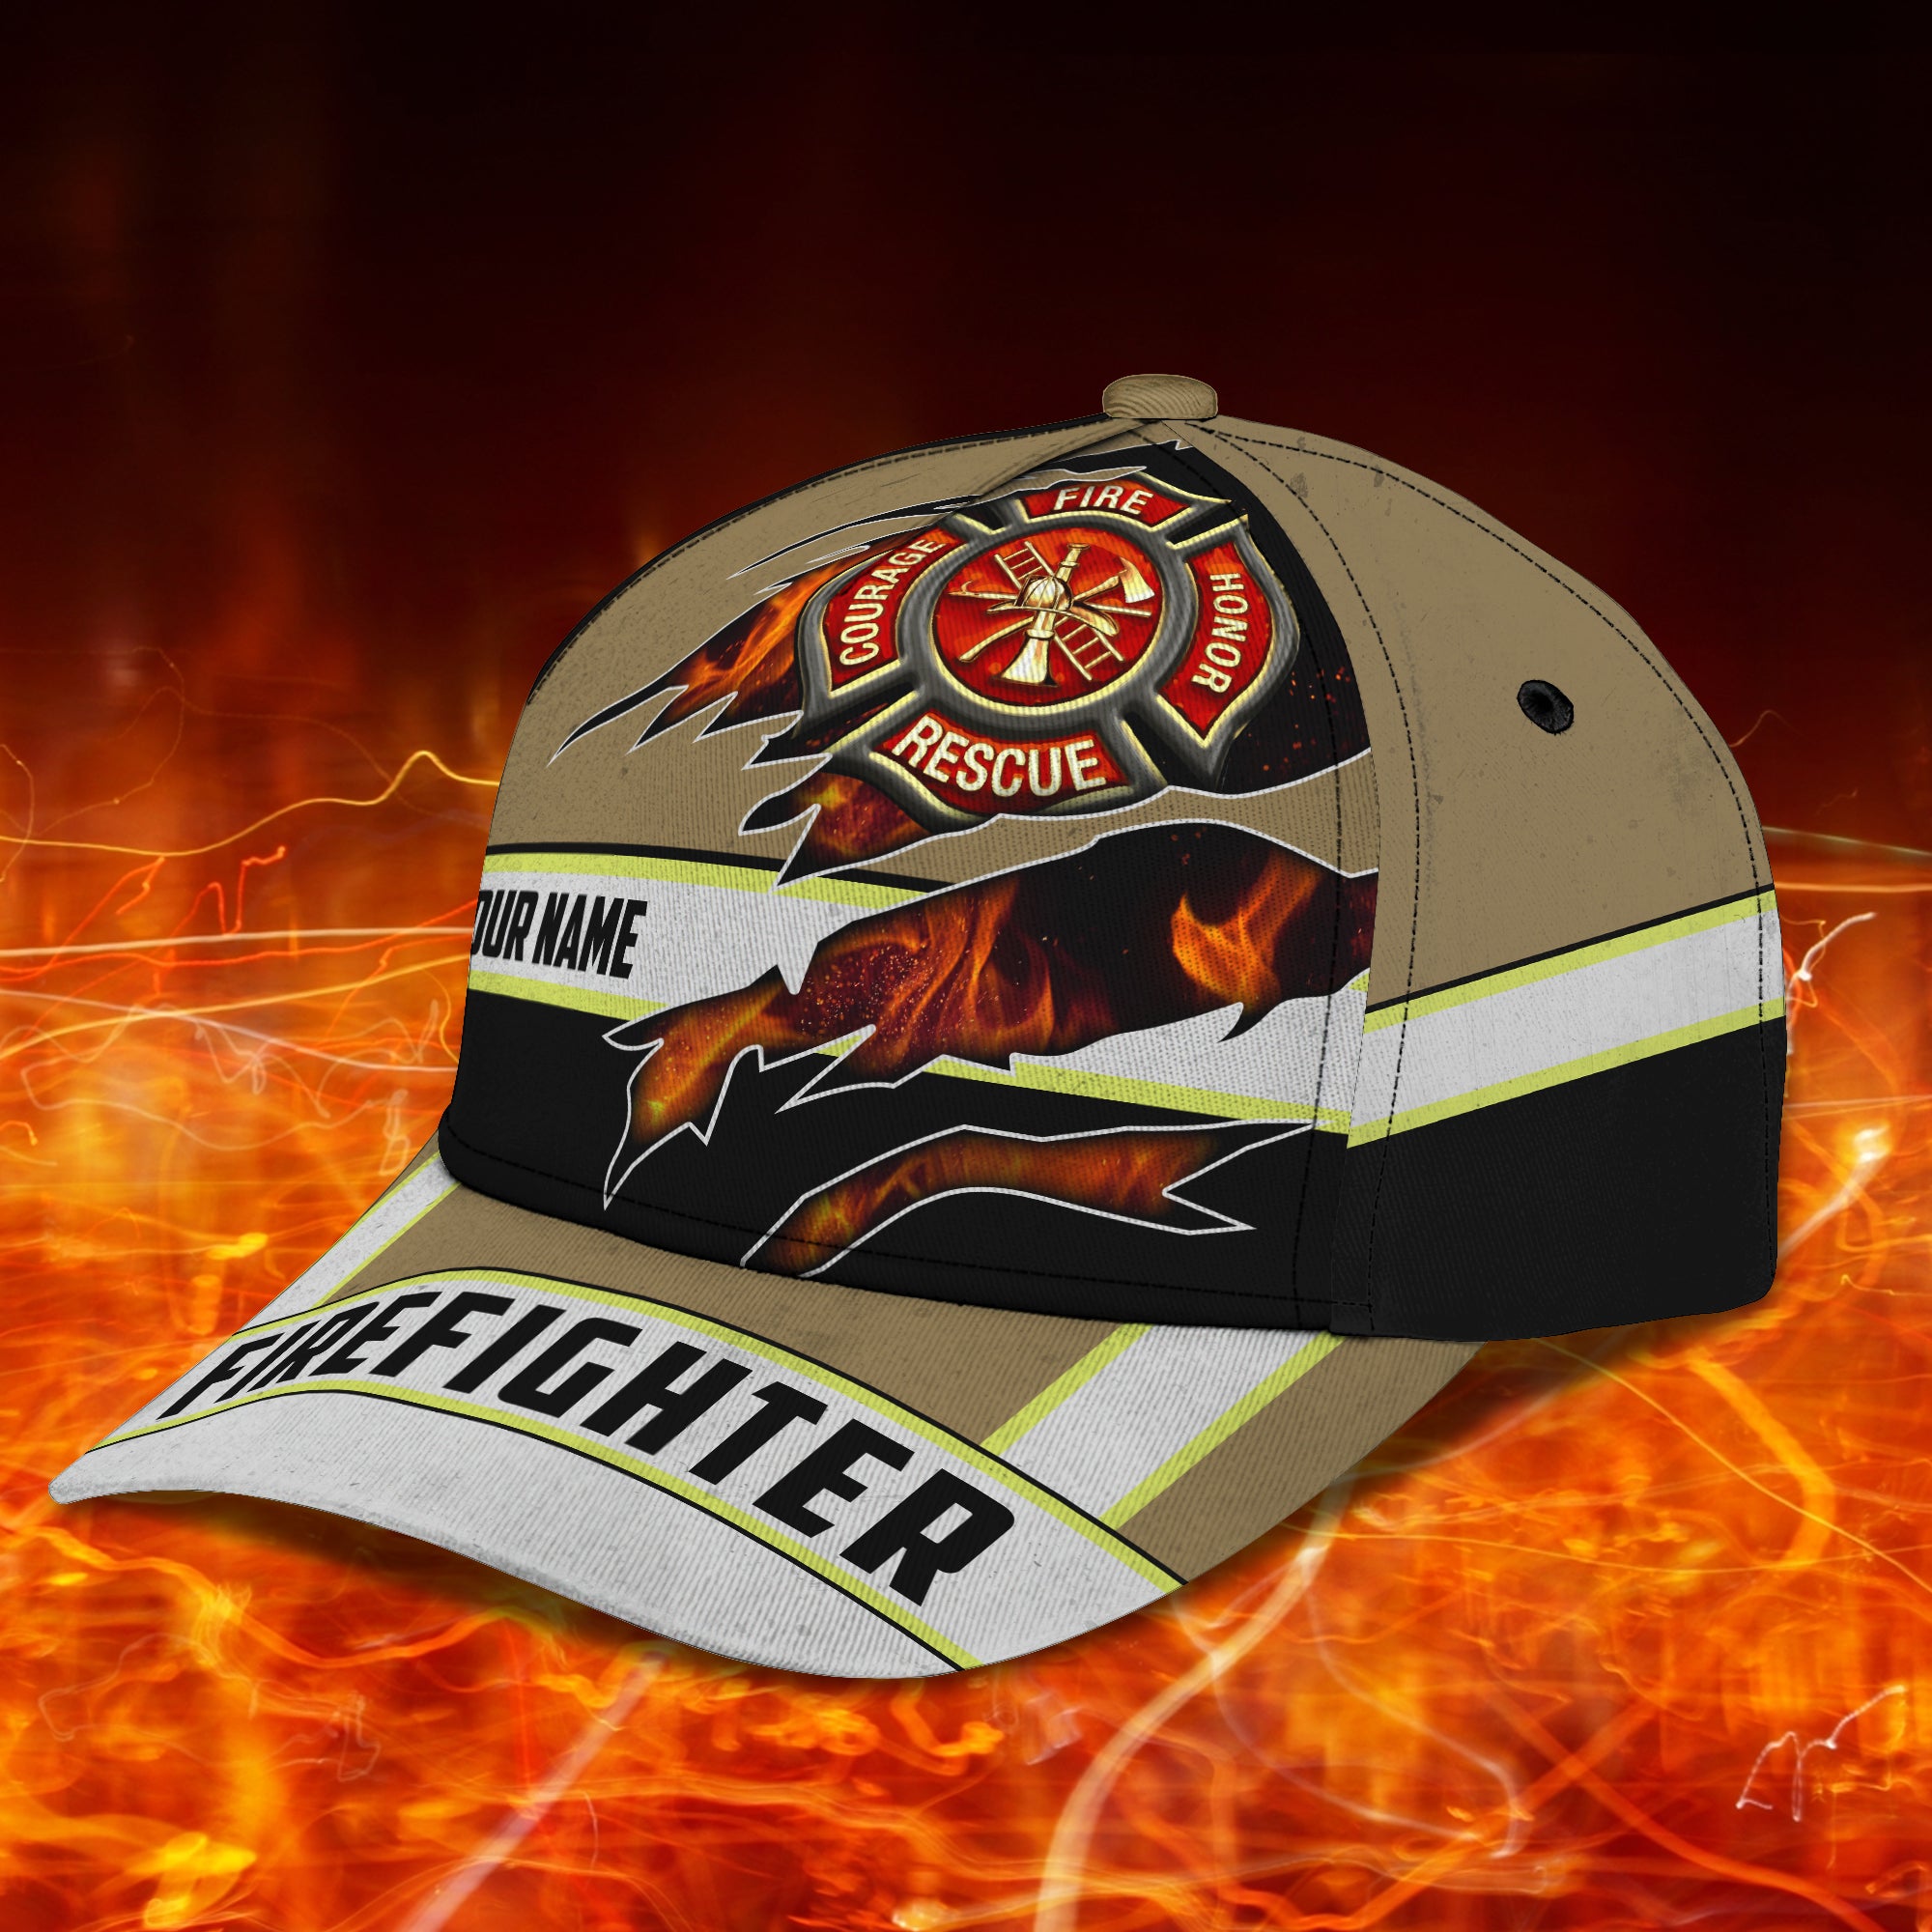 Firefighter 01- Personalized Name Cap - tra96